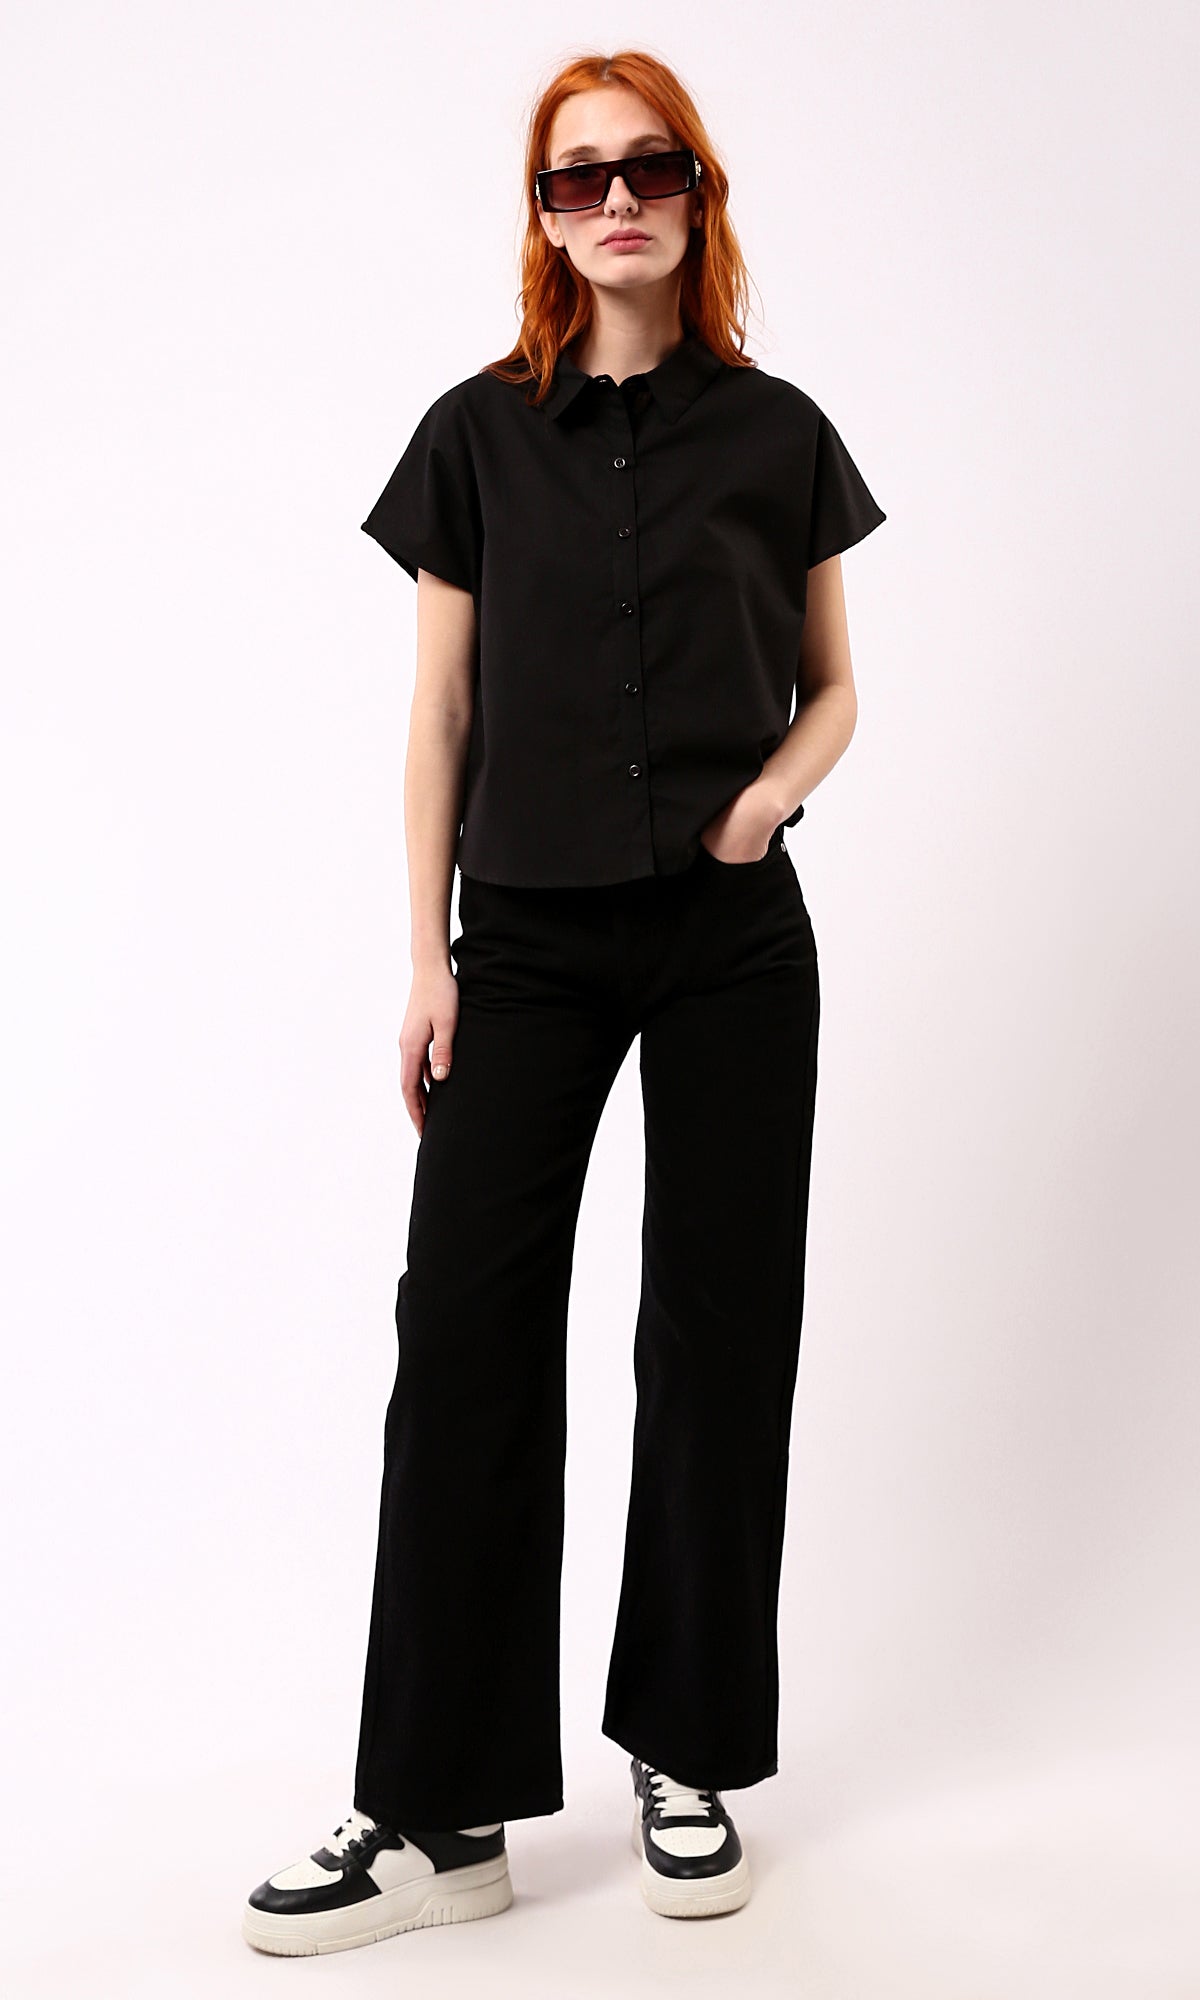 O189384 Solid Black Wide-Leg Casual Jeans